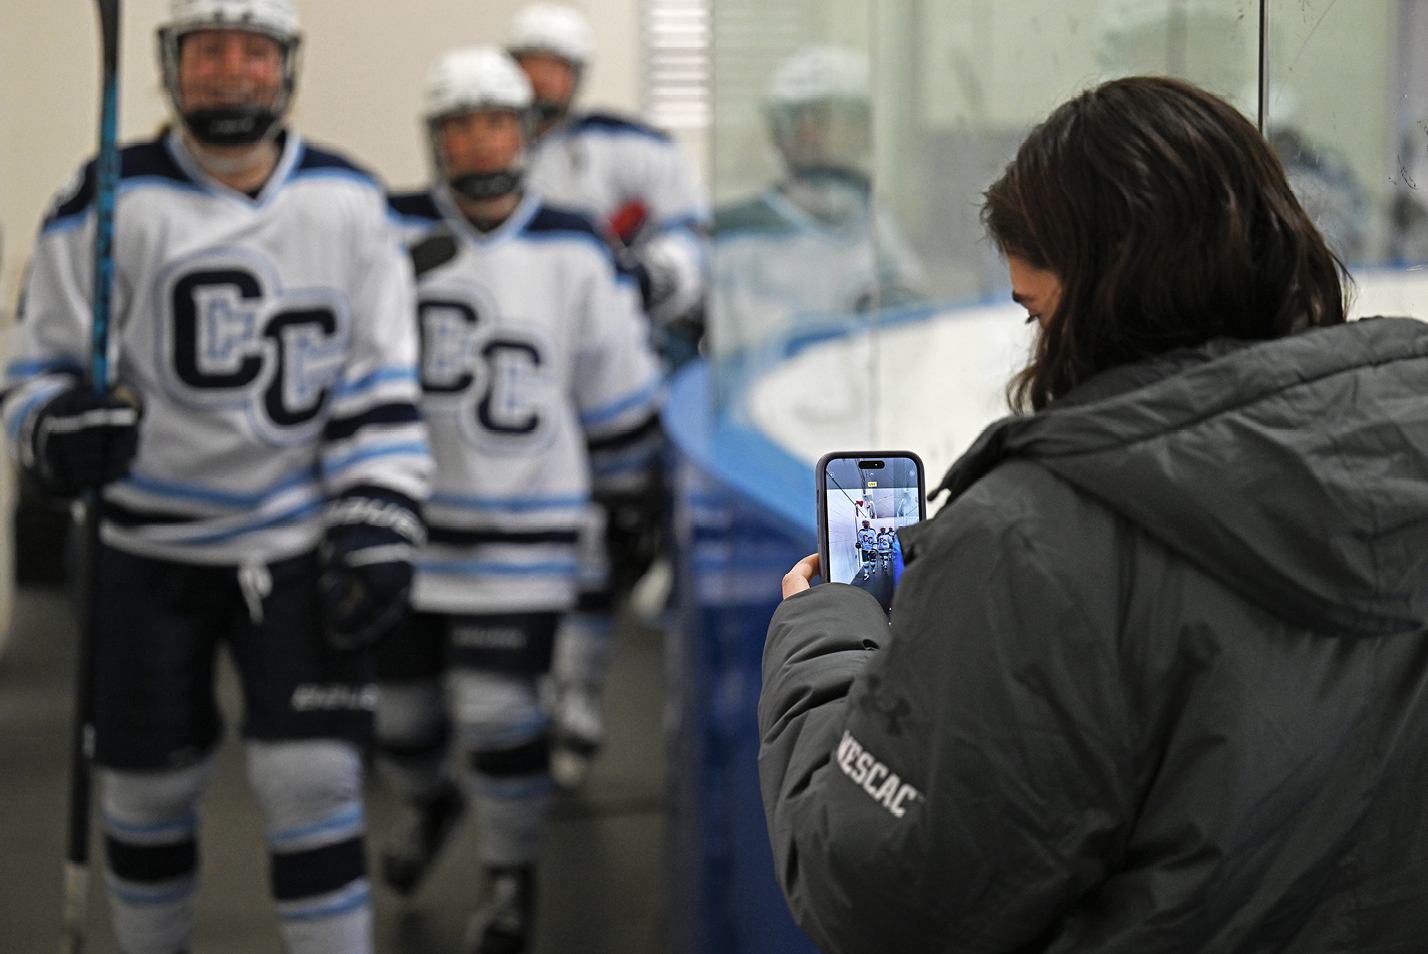 A student snaps a camera image of the hockey team.